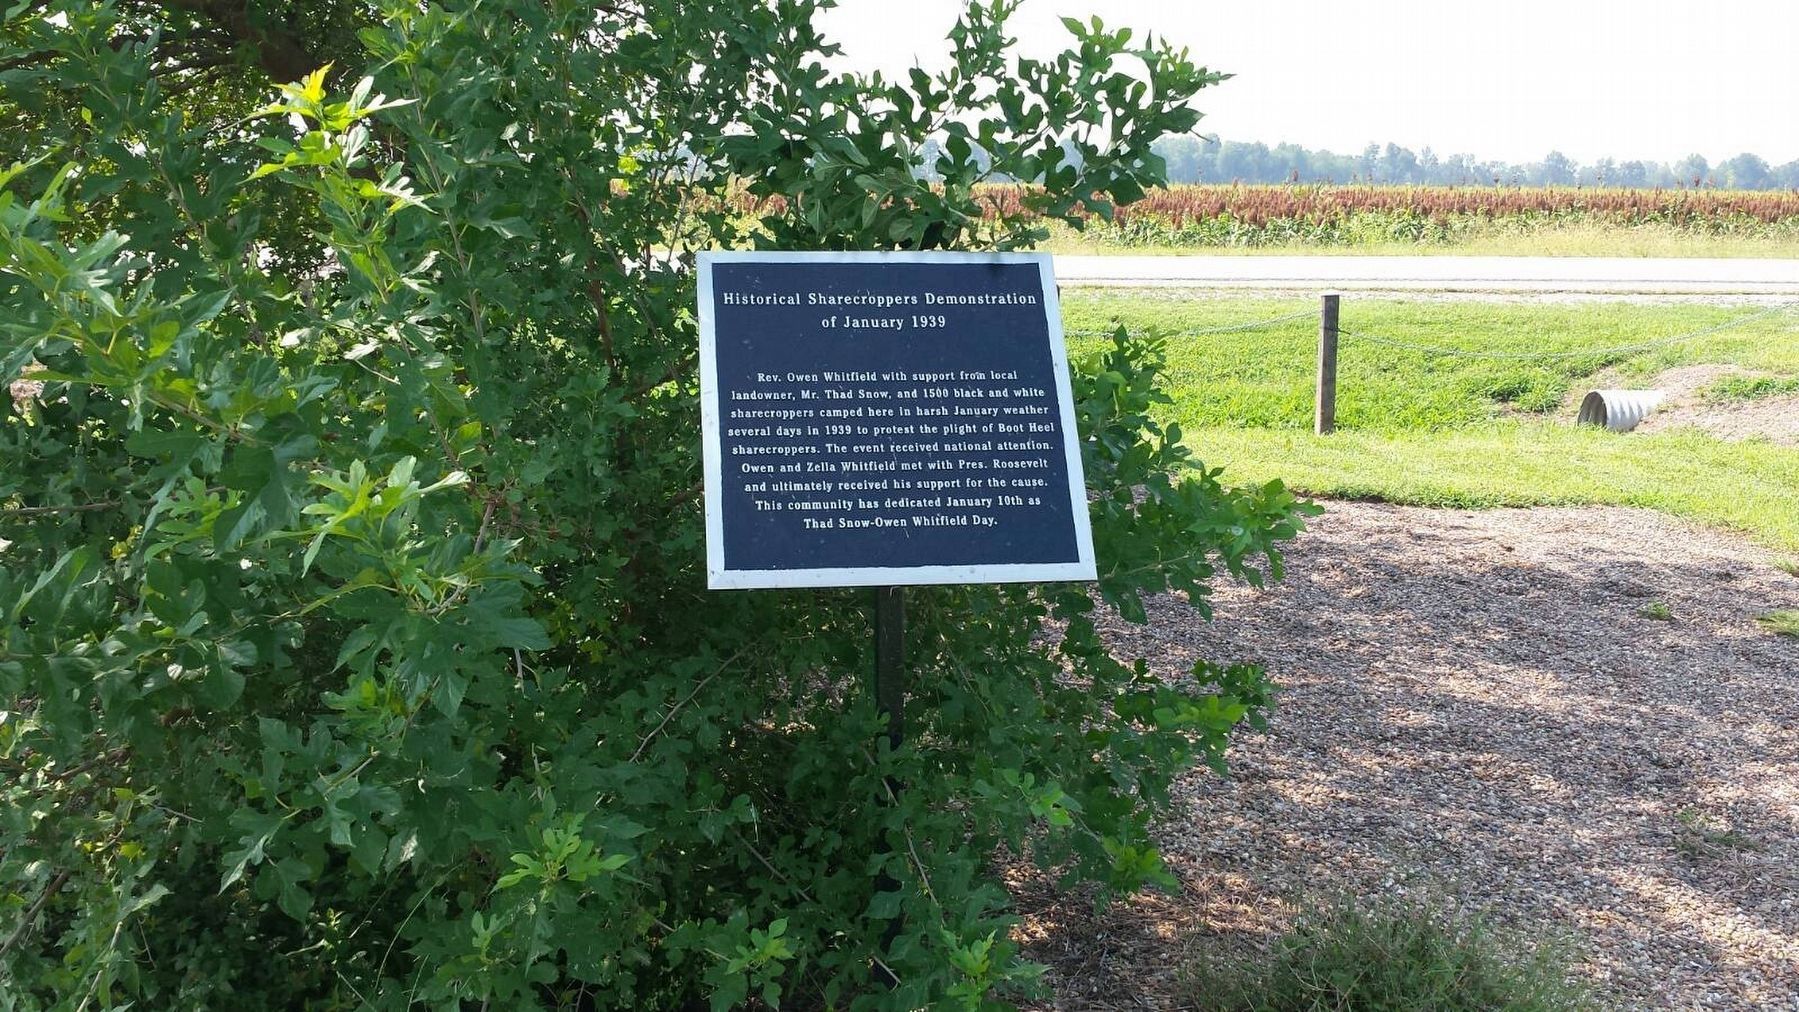 Site of the Sharecroppers Strike of 1939 Marker image. Click for full size.